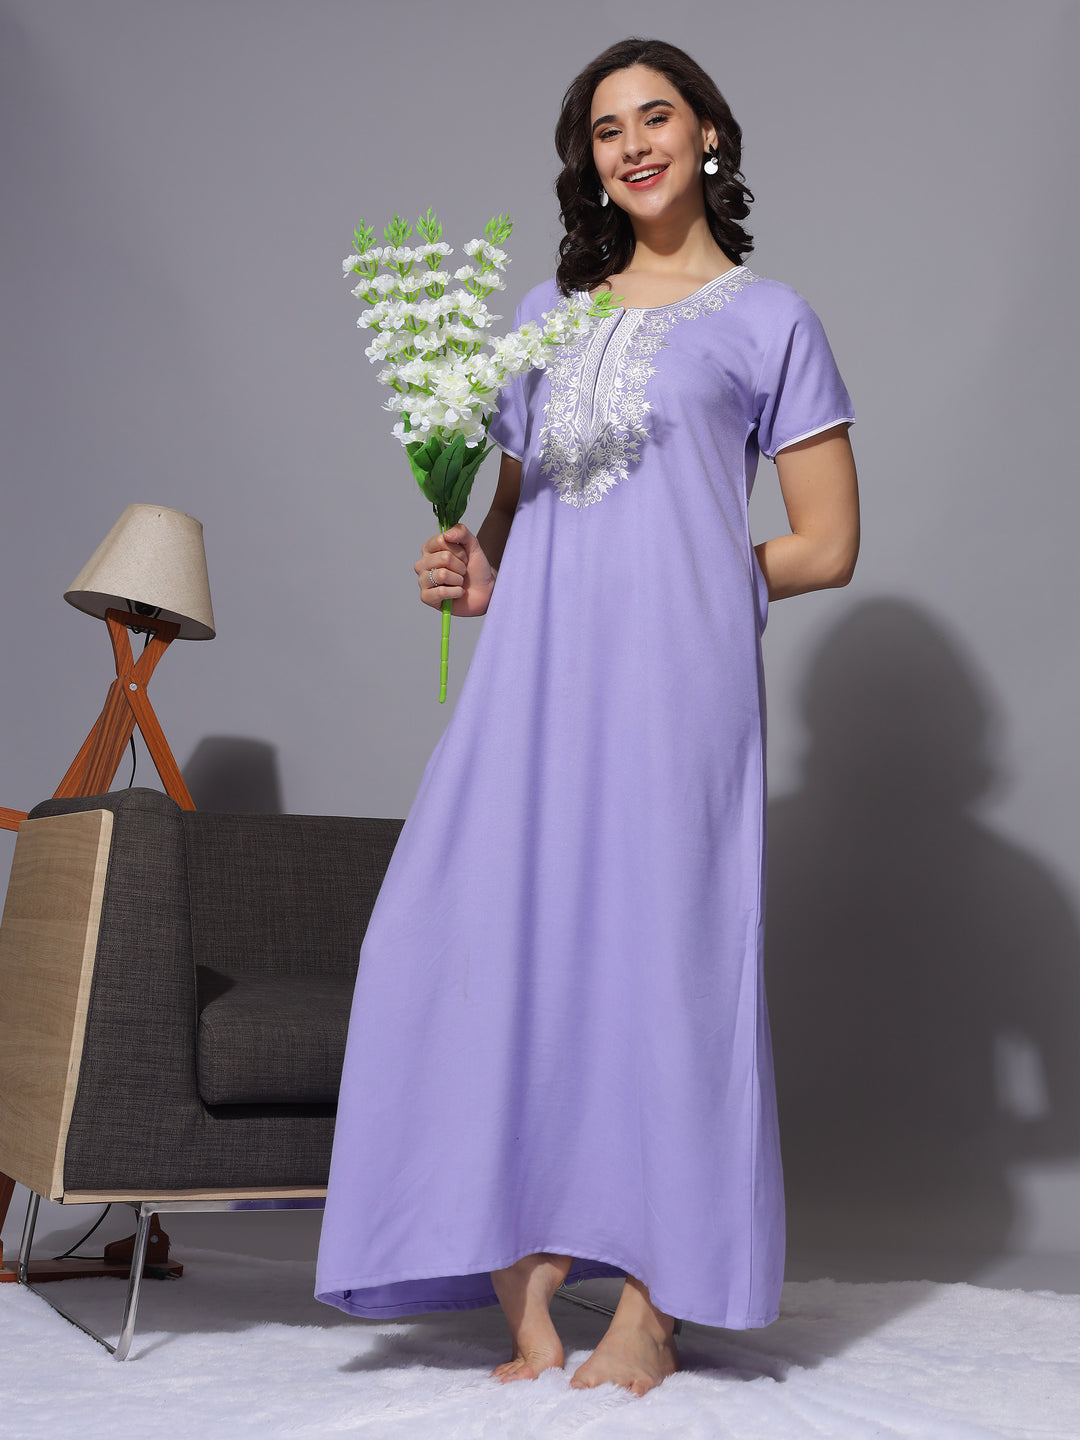 Limited Edition: Aesthetic Embroidery Pastel Lavender Nightgown